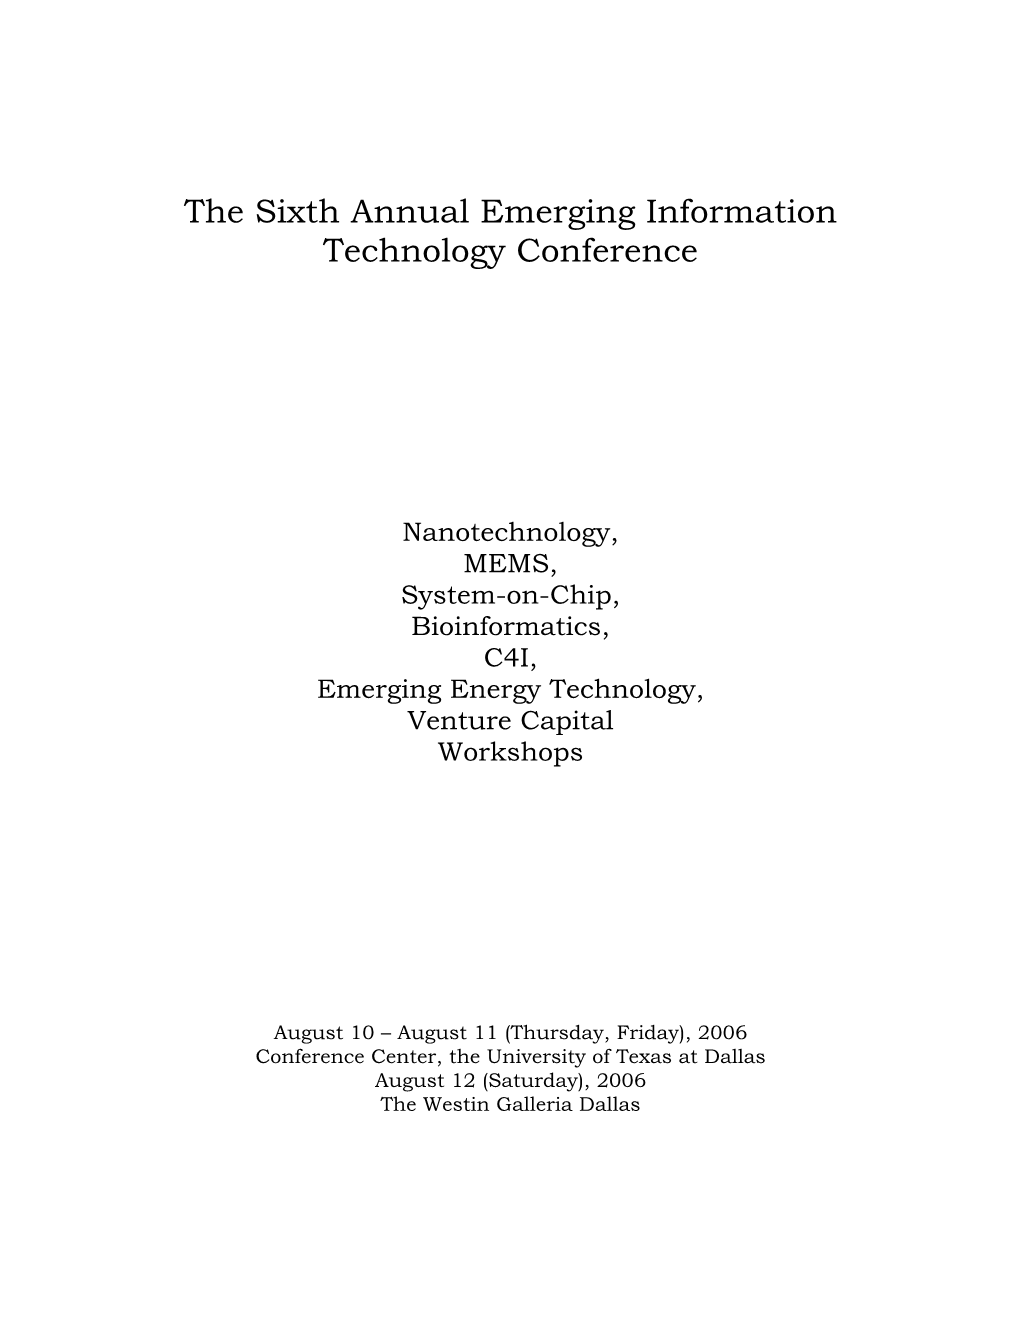 The Sixth Annual Emerging Information Technology Conference